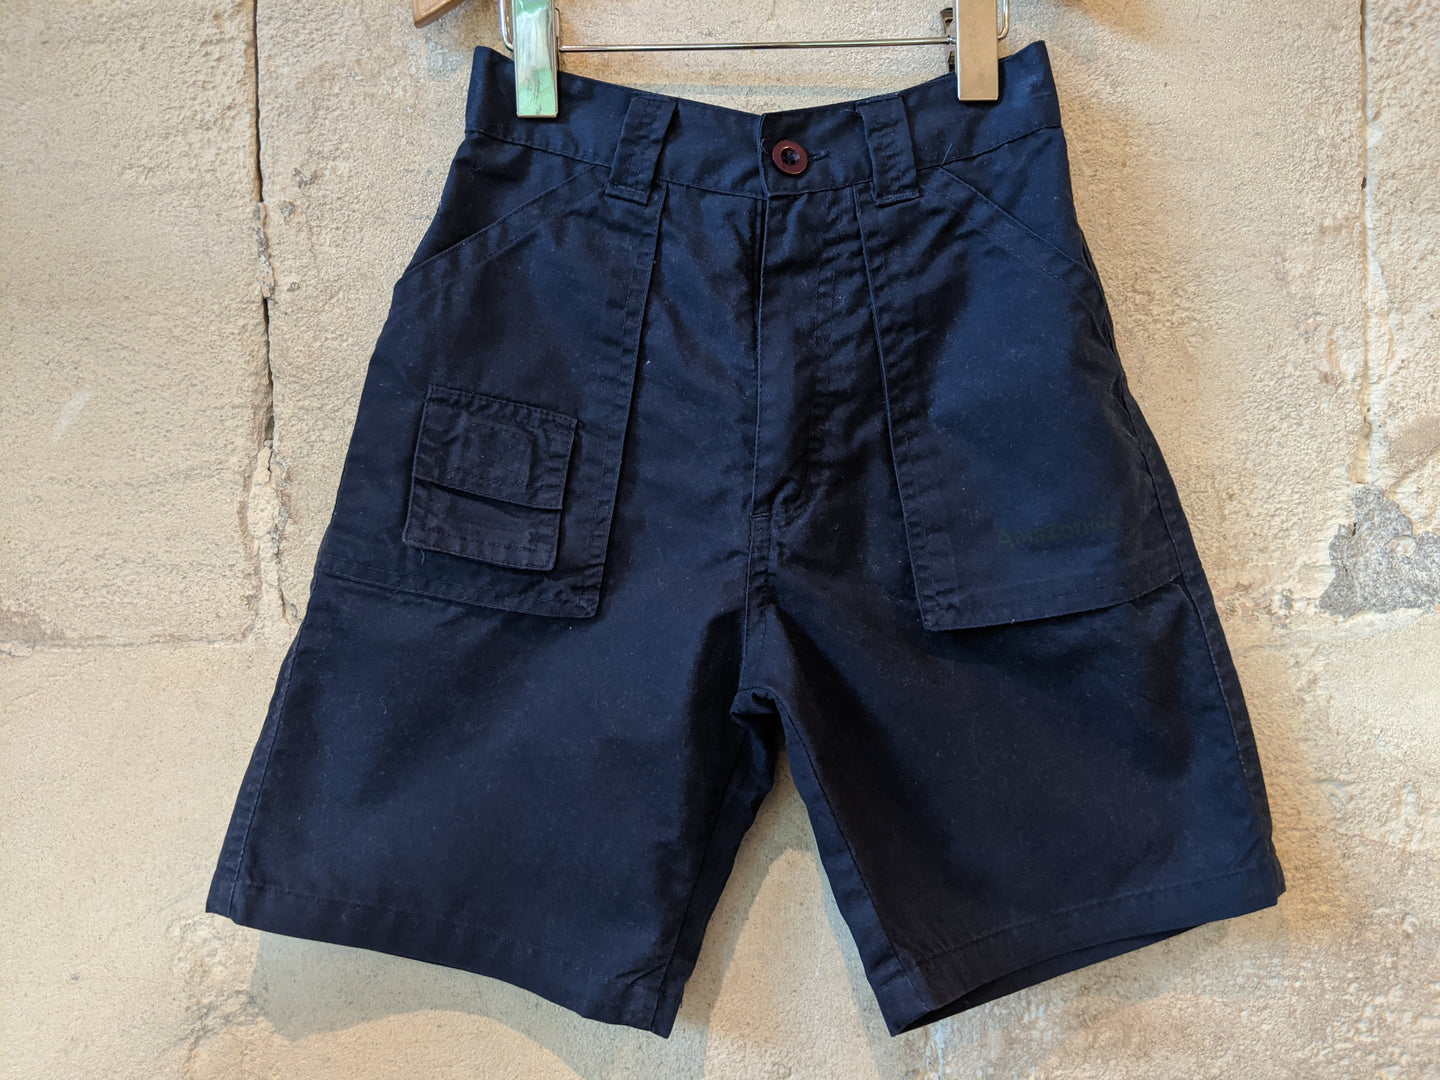 French Vintage Navy Smart Combat Style Shorts - 4 Years